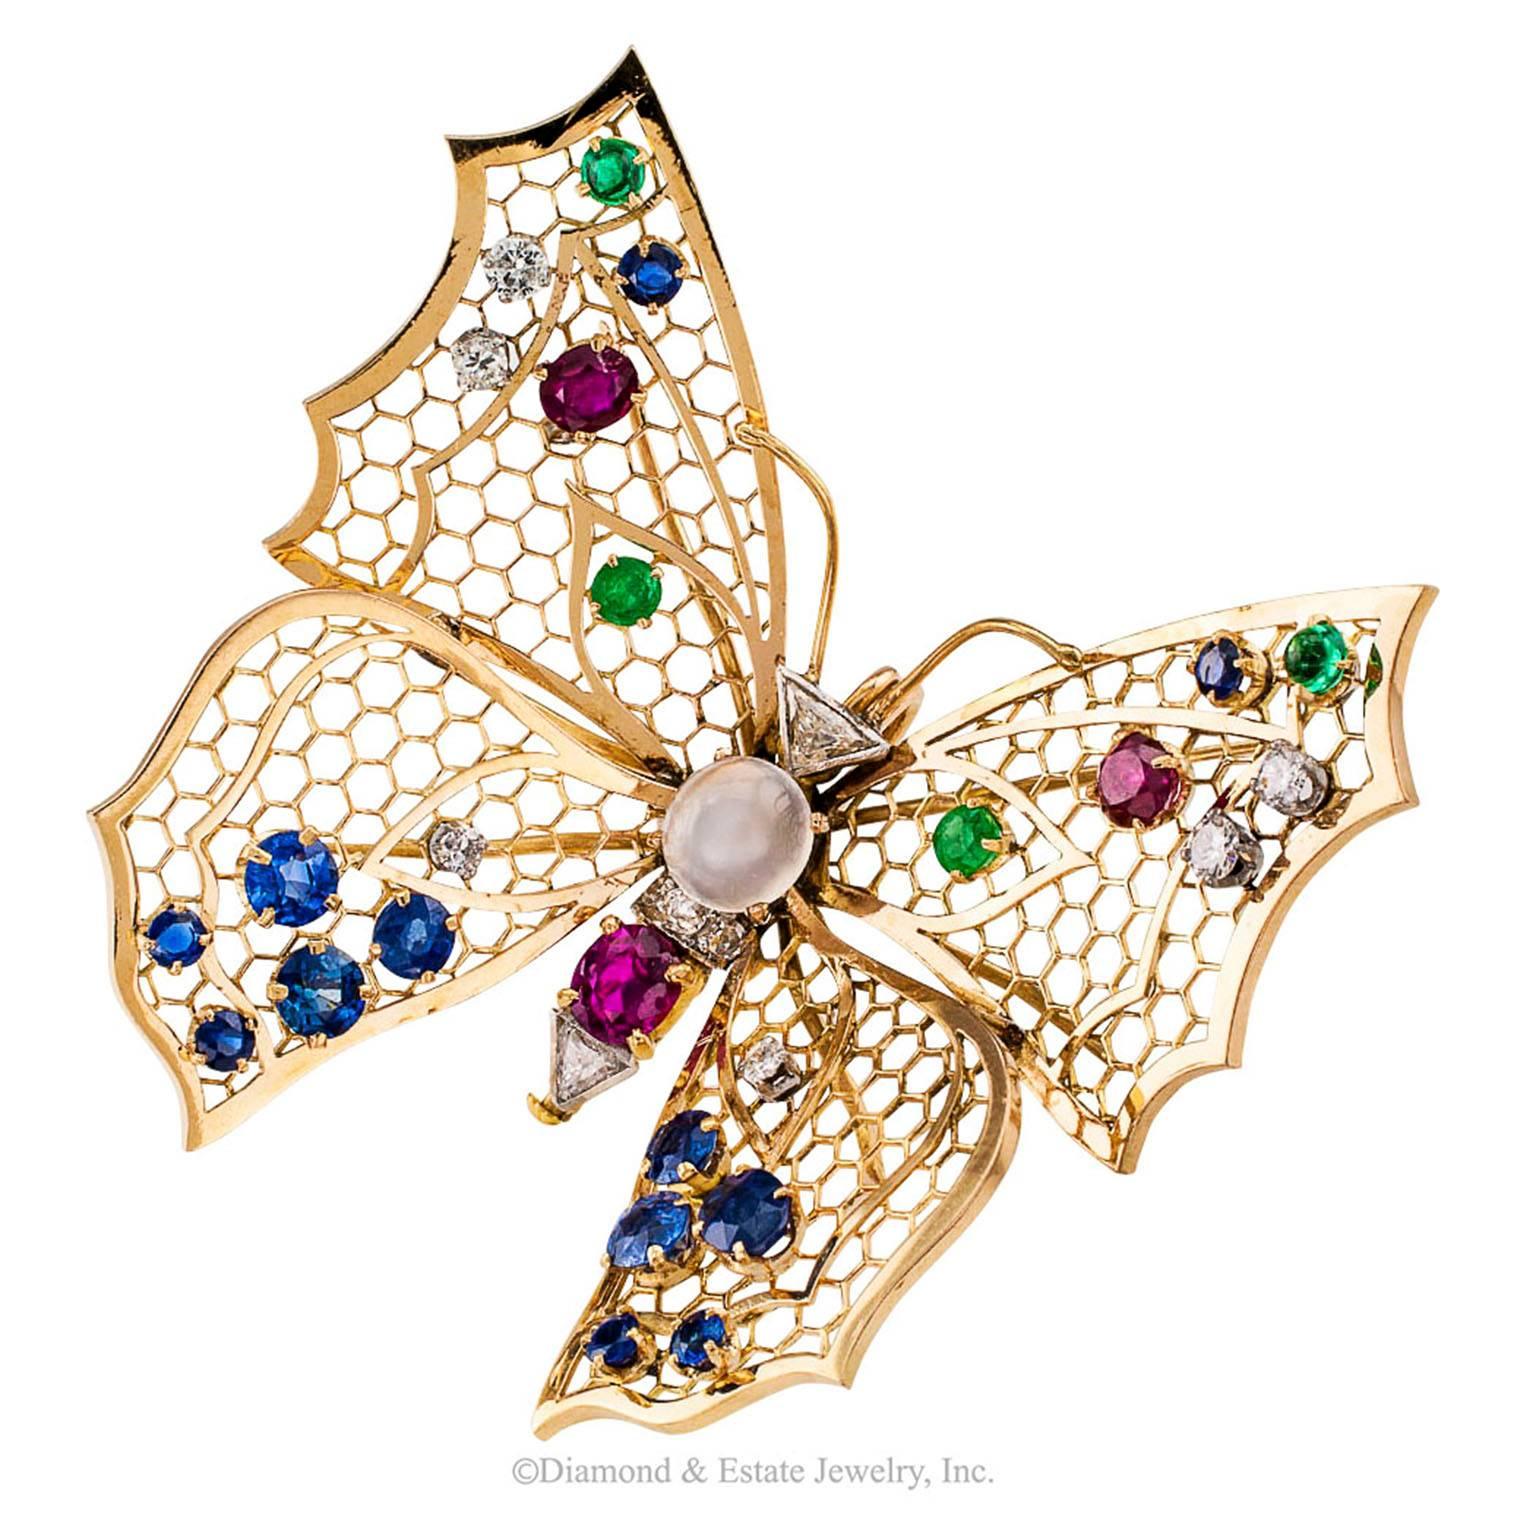 Butterfly Gold Brooch Diamonds Emeralds Moonstone Rubies Sapphires

Mid century butterfly brooch wings and body set with  diamonds emeralds a moonstone rubies and sapphires 18-karat yellow gold circa 1950.  Light and delicate as a real butterfly in